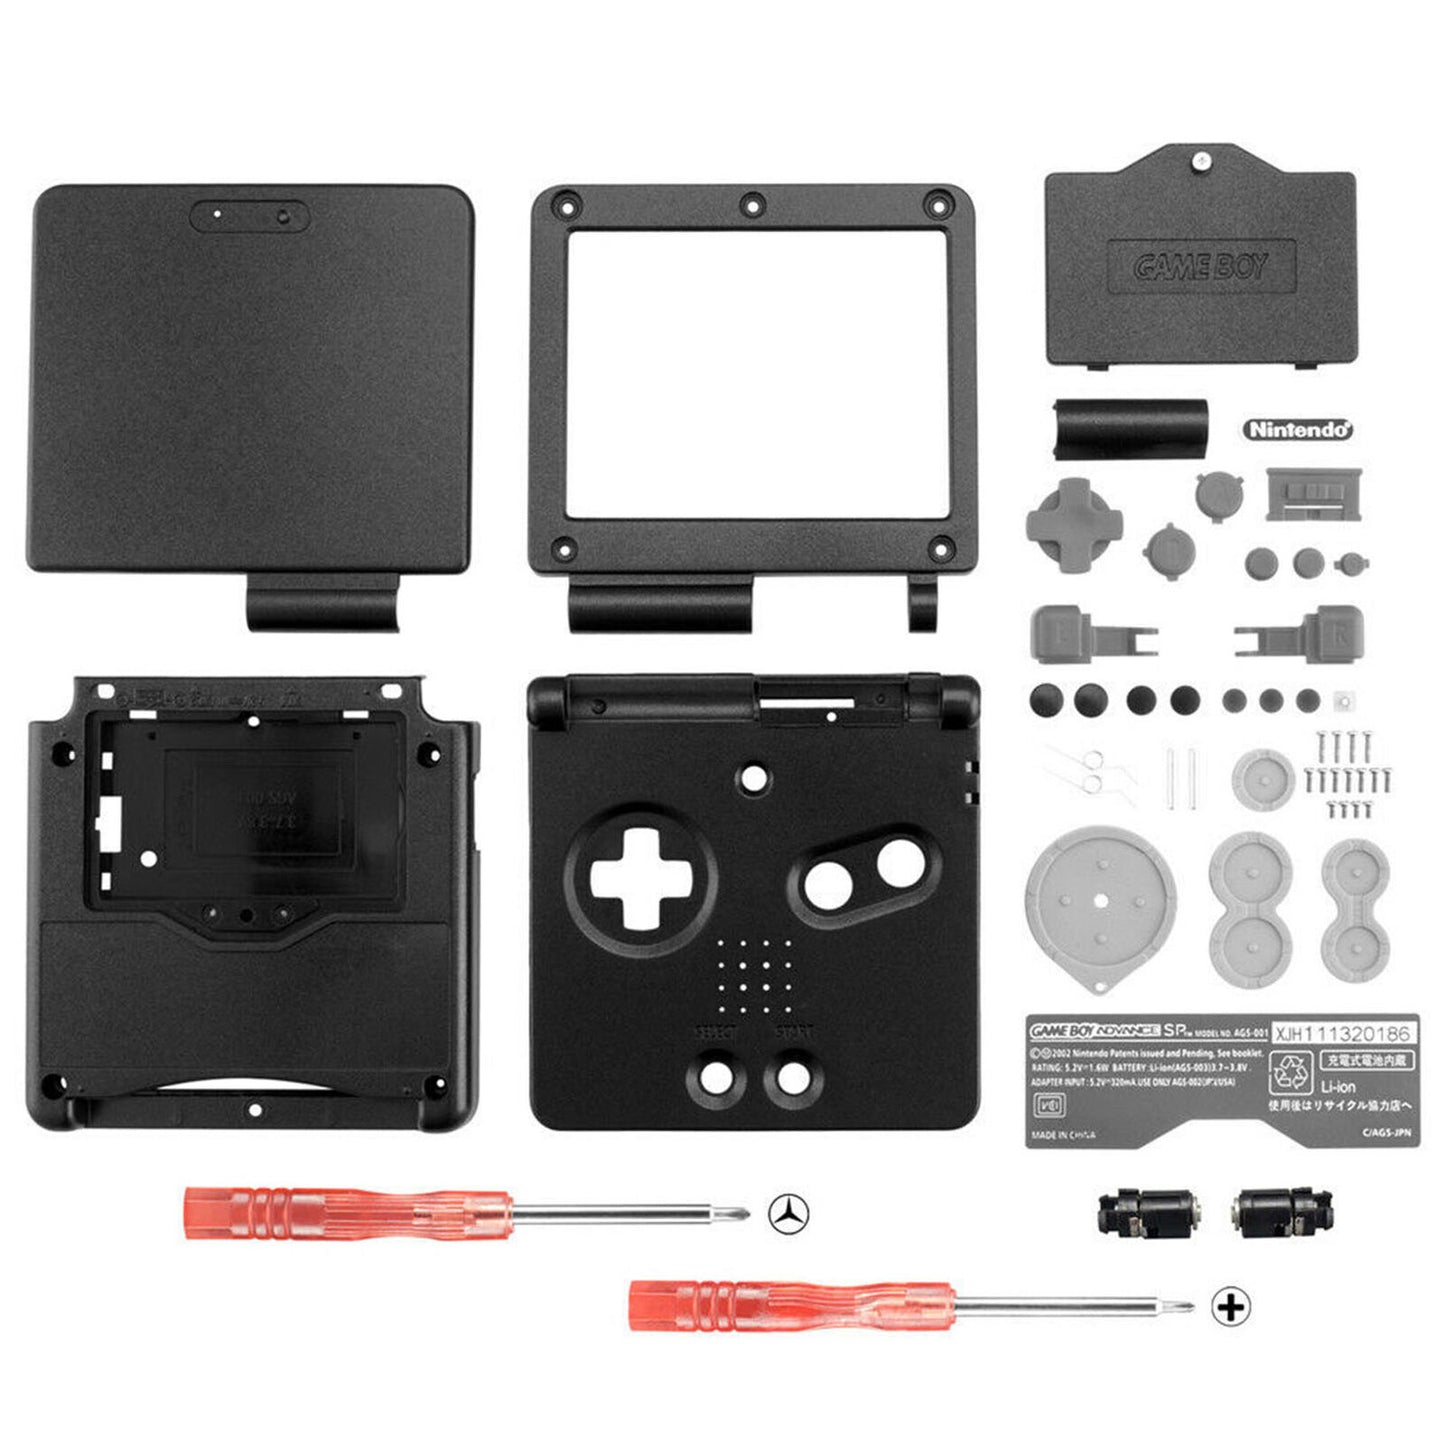 Gameboy Advance SP Replacement Shell (Black with Grey Buttons) (Gameboy Advance)